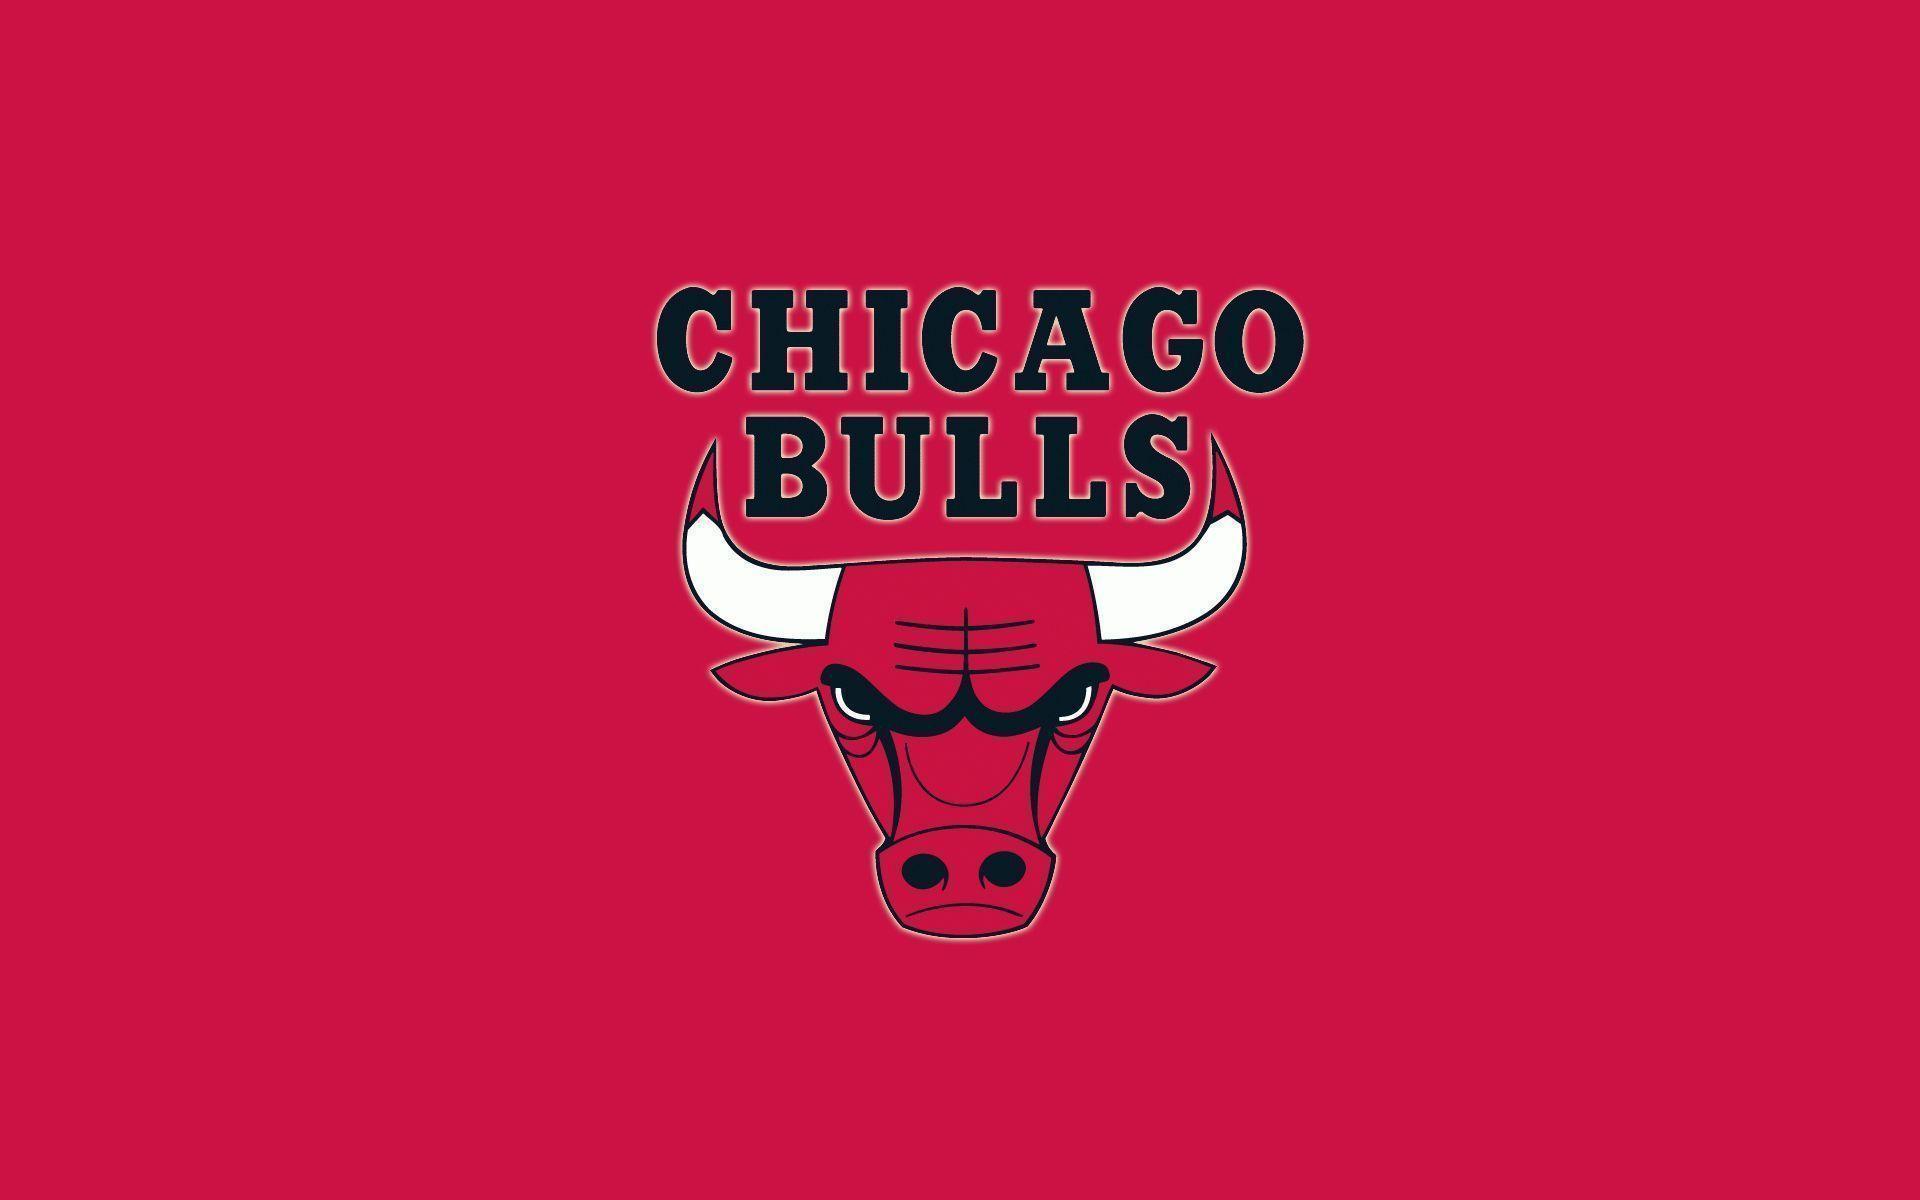 Chicago Bulls Backgrounds posted by Zoey Tremblay